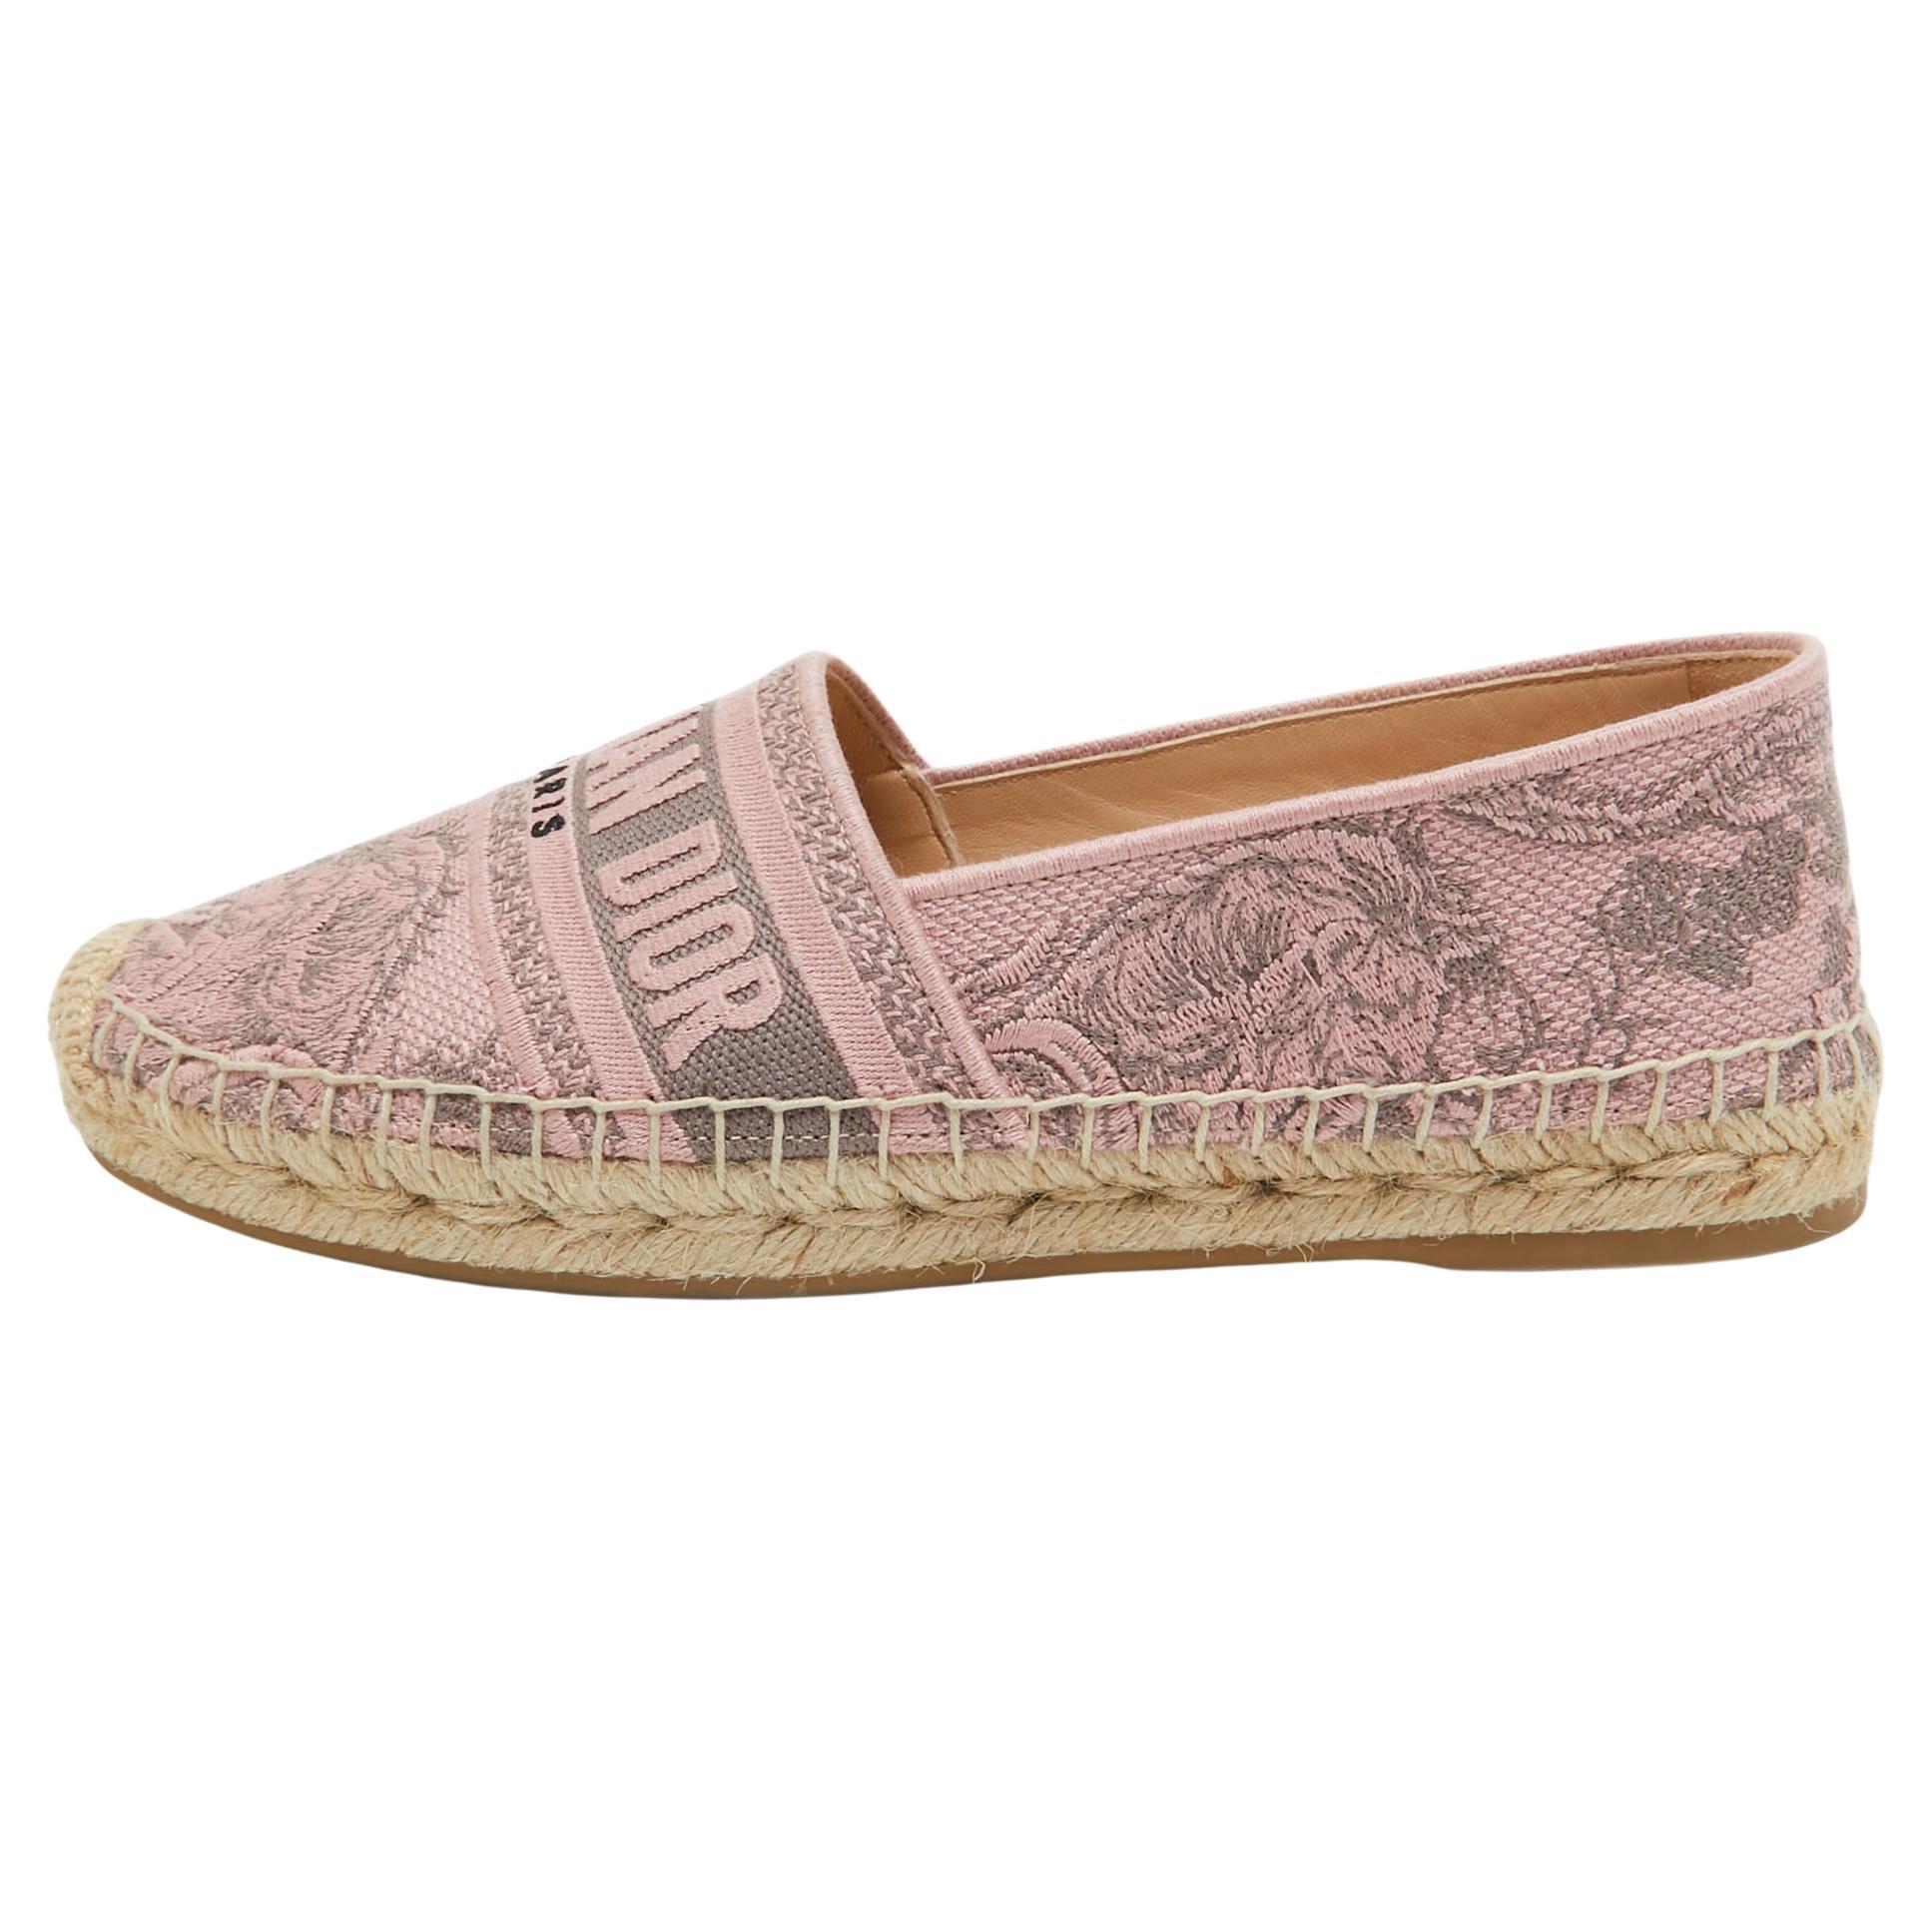 Dior Pink/Grey Embroidered Canvas Granville Espadrille Flats Size 36.5